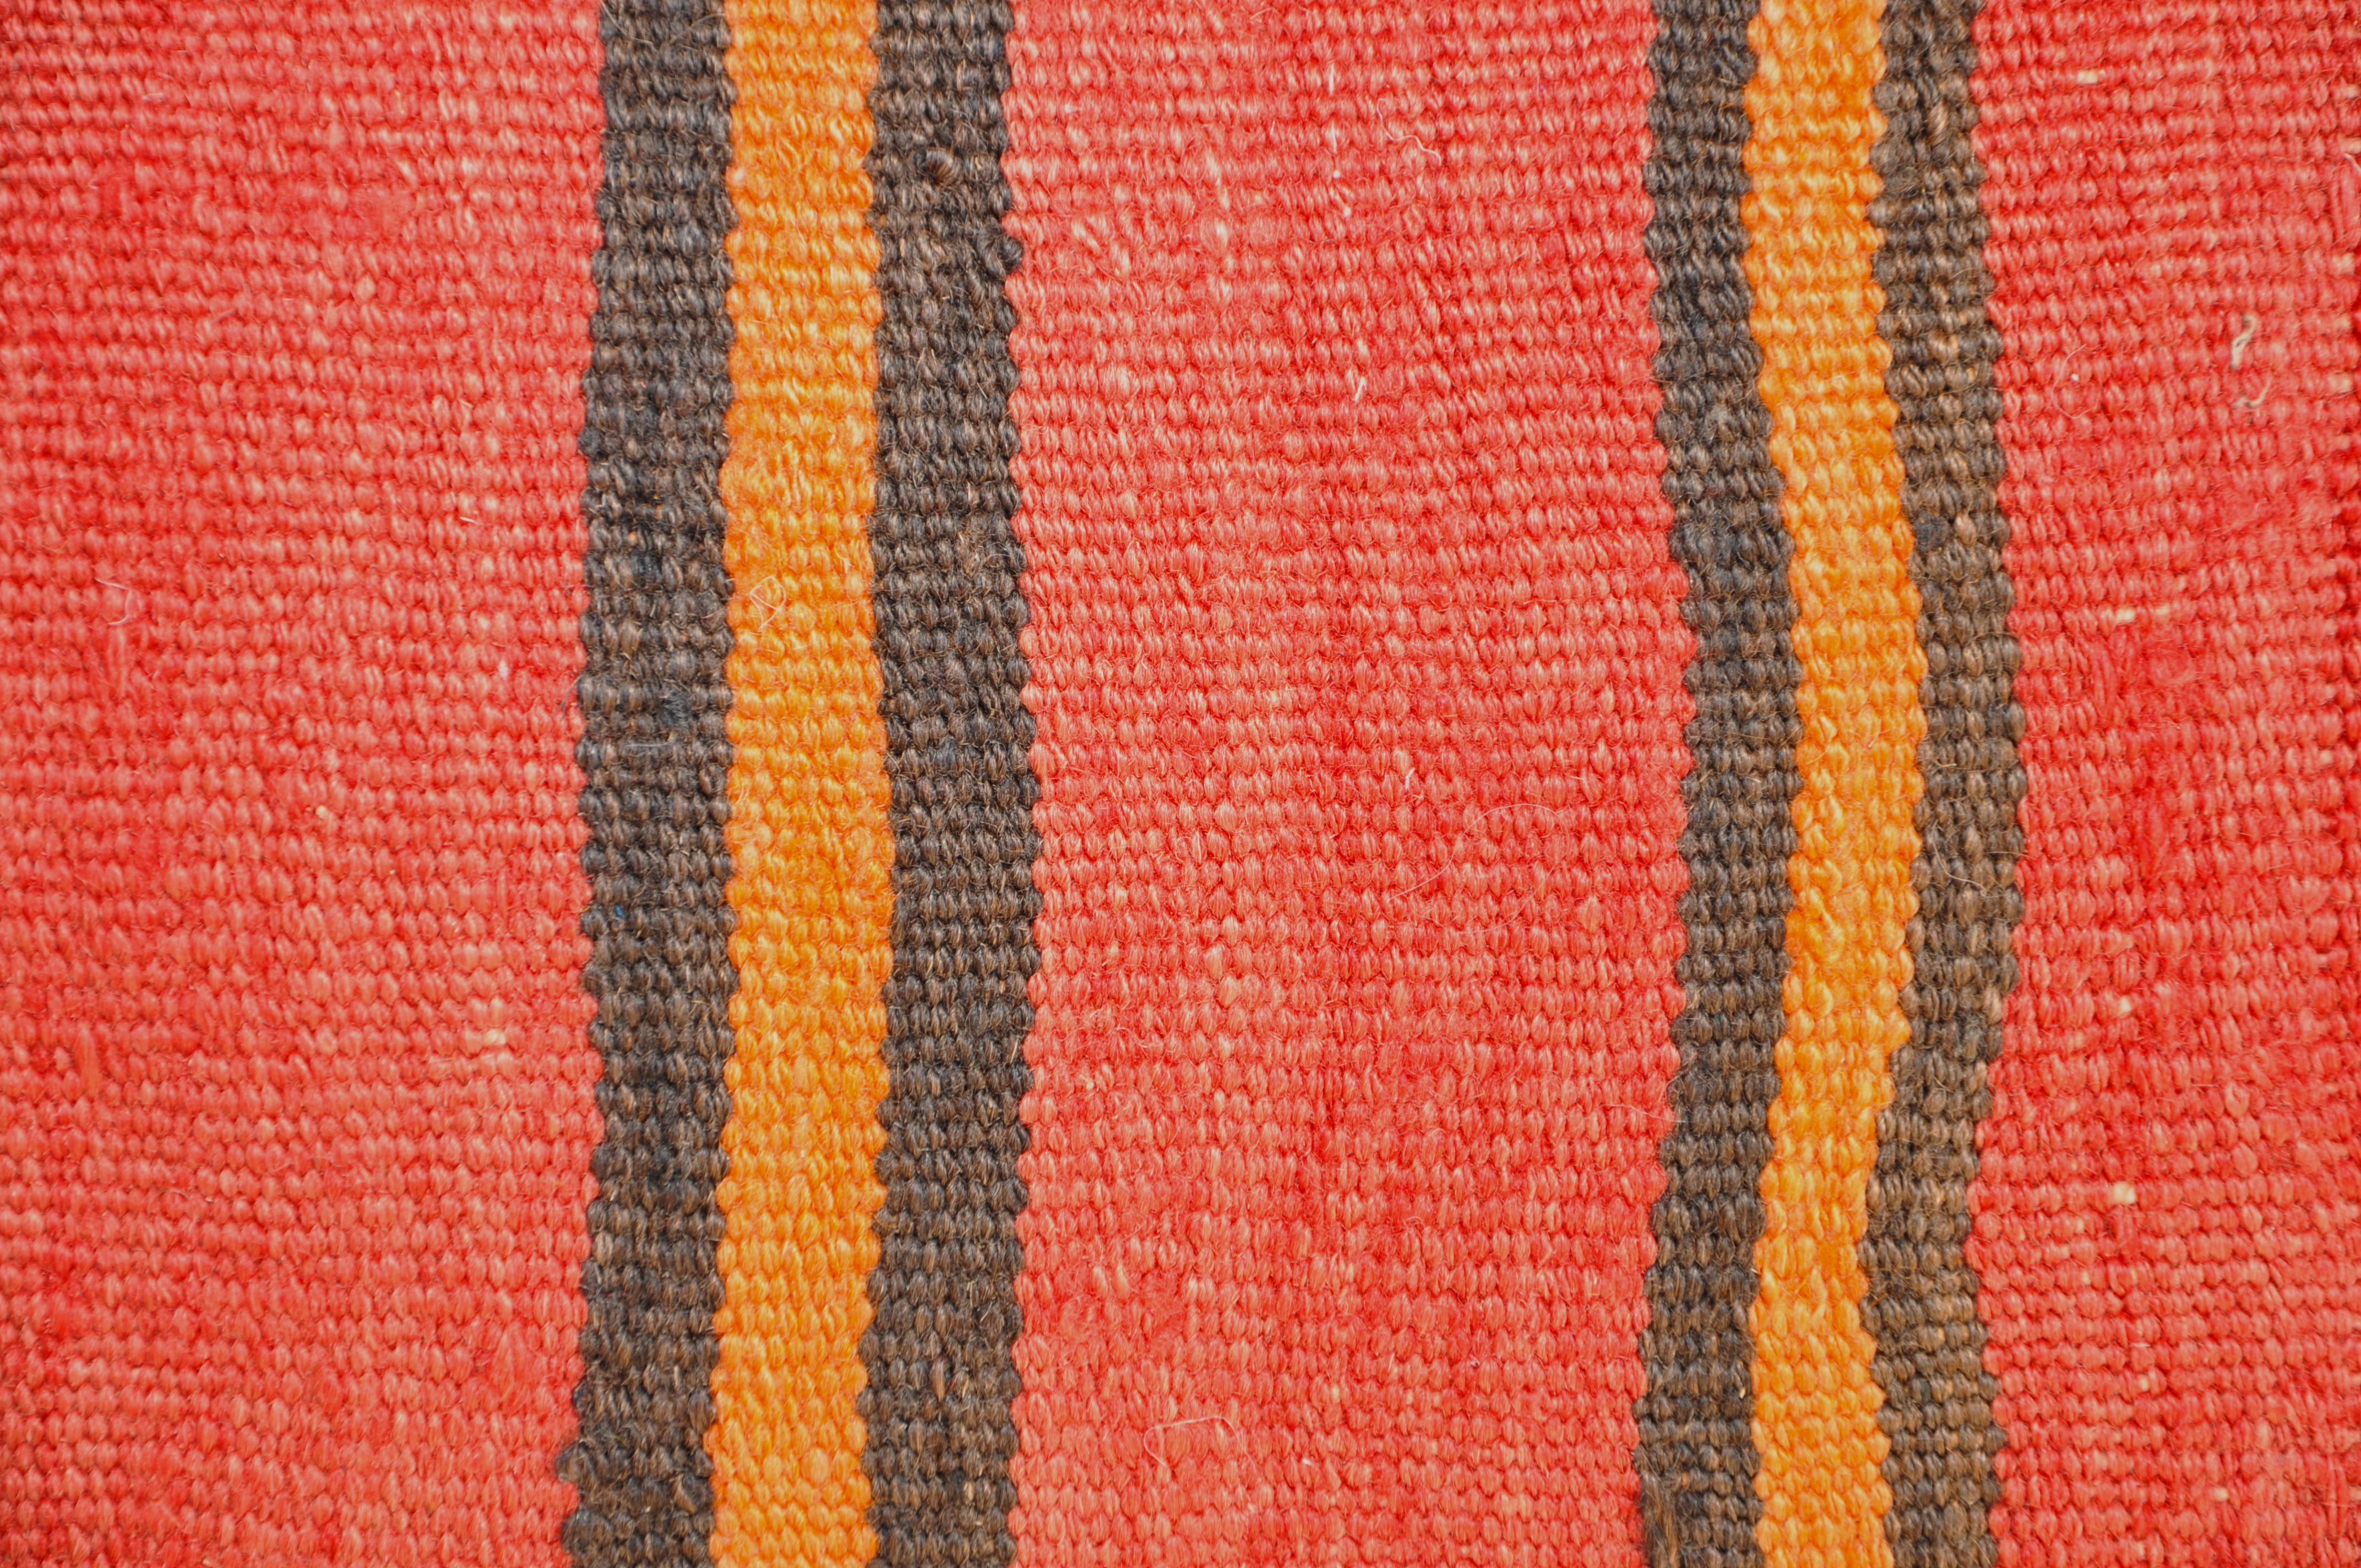 Luxury pillow created from an exquisite piece of vintage kilim rug combined with Irish Linen by Irish designer Katie Larmour. Unique and one-of-a-kind. 

In rich, warm, dramatic stripes of orangey rust red and soft black. 

Each cushion is